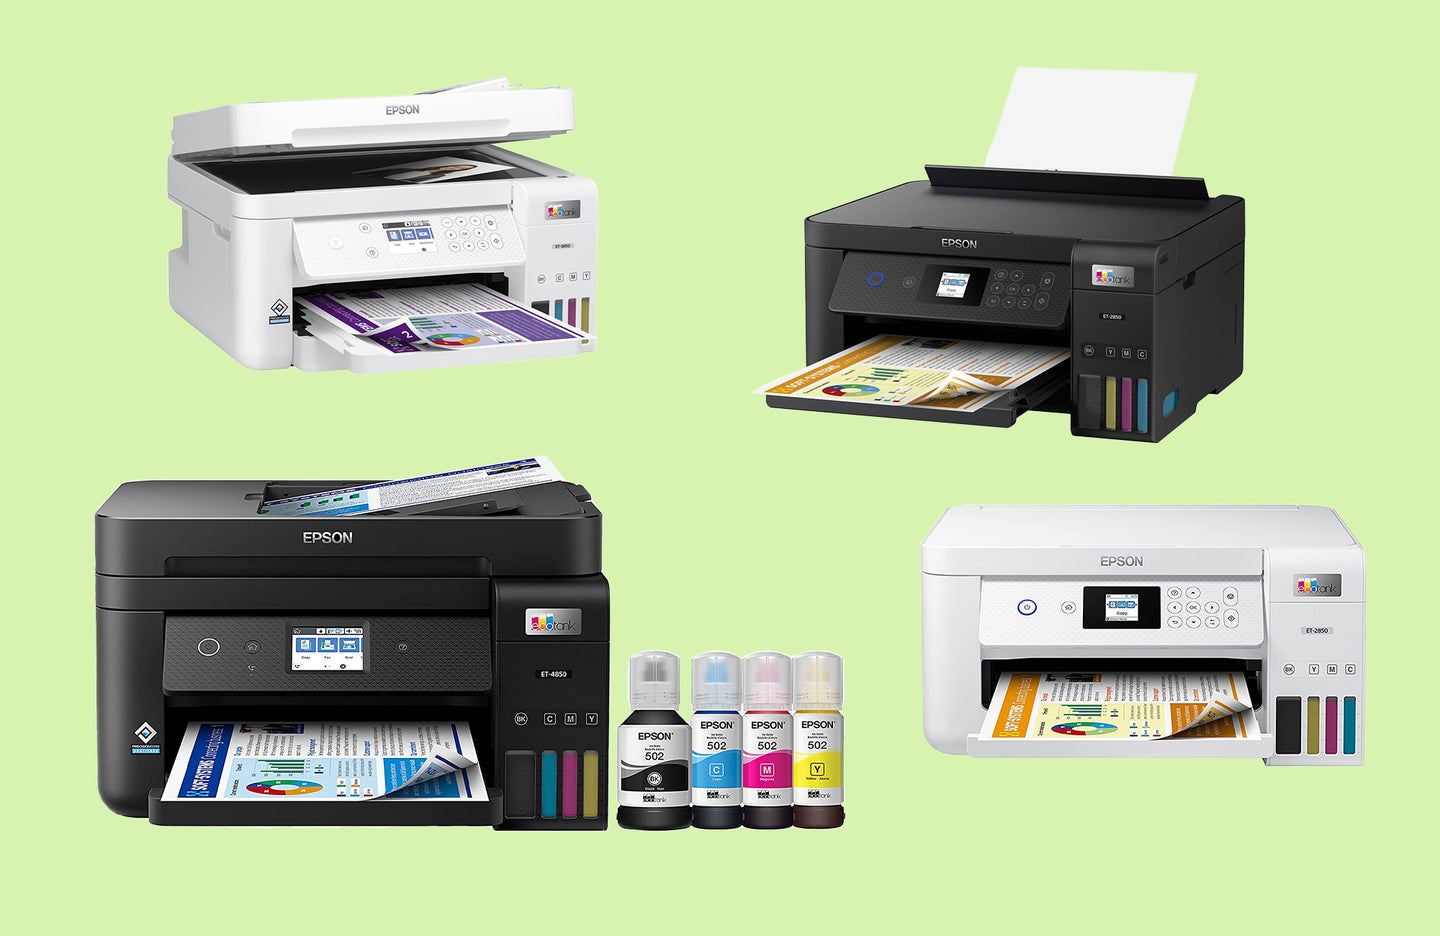 Save up to $150 on Epson EcoTank printers for Teacher Appreciation Week